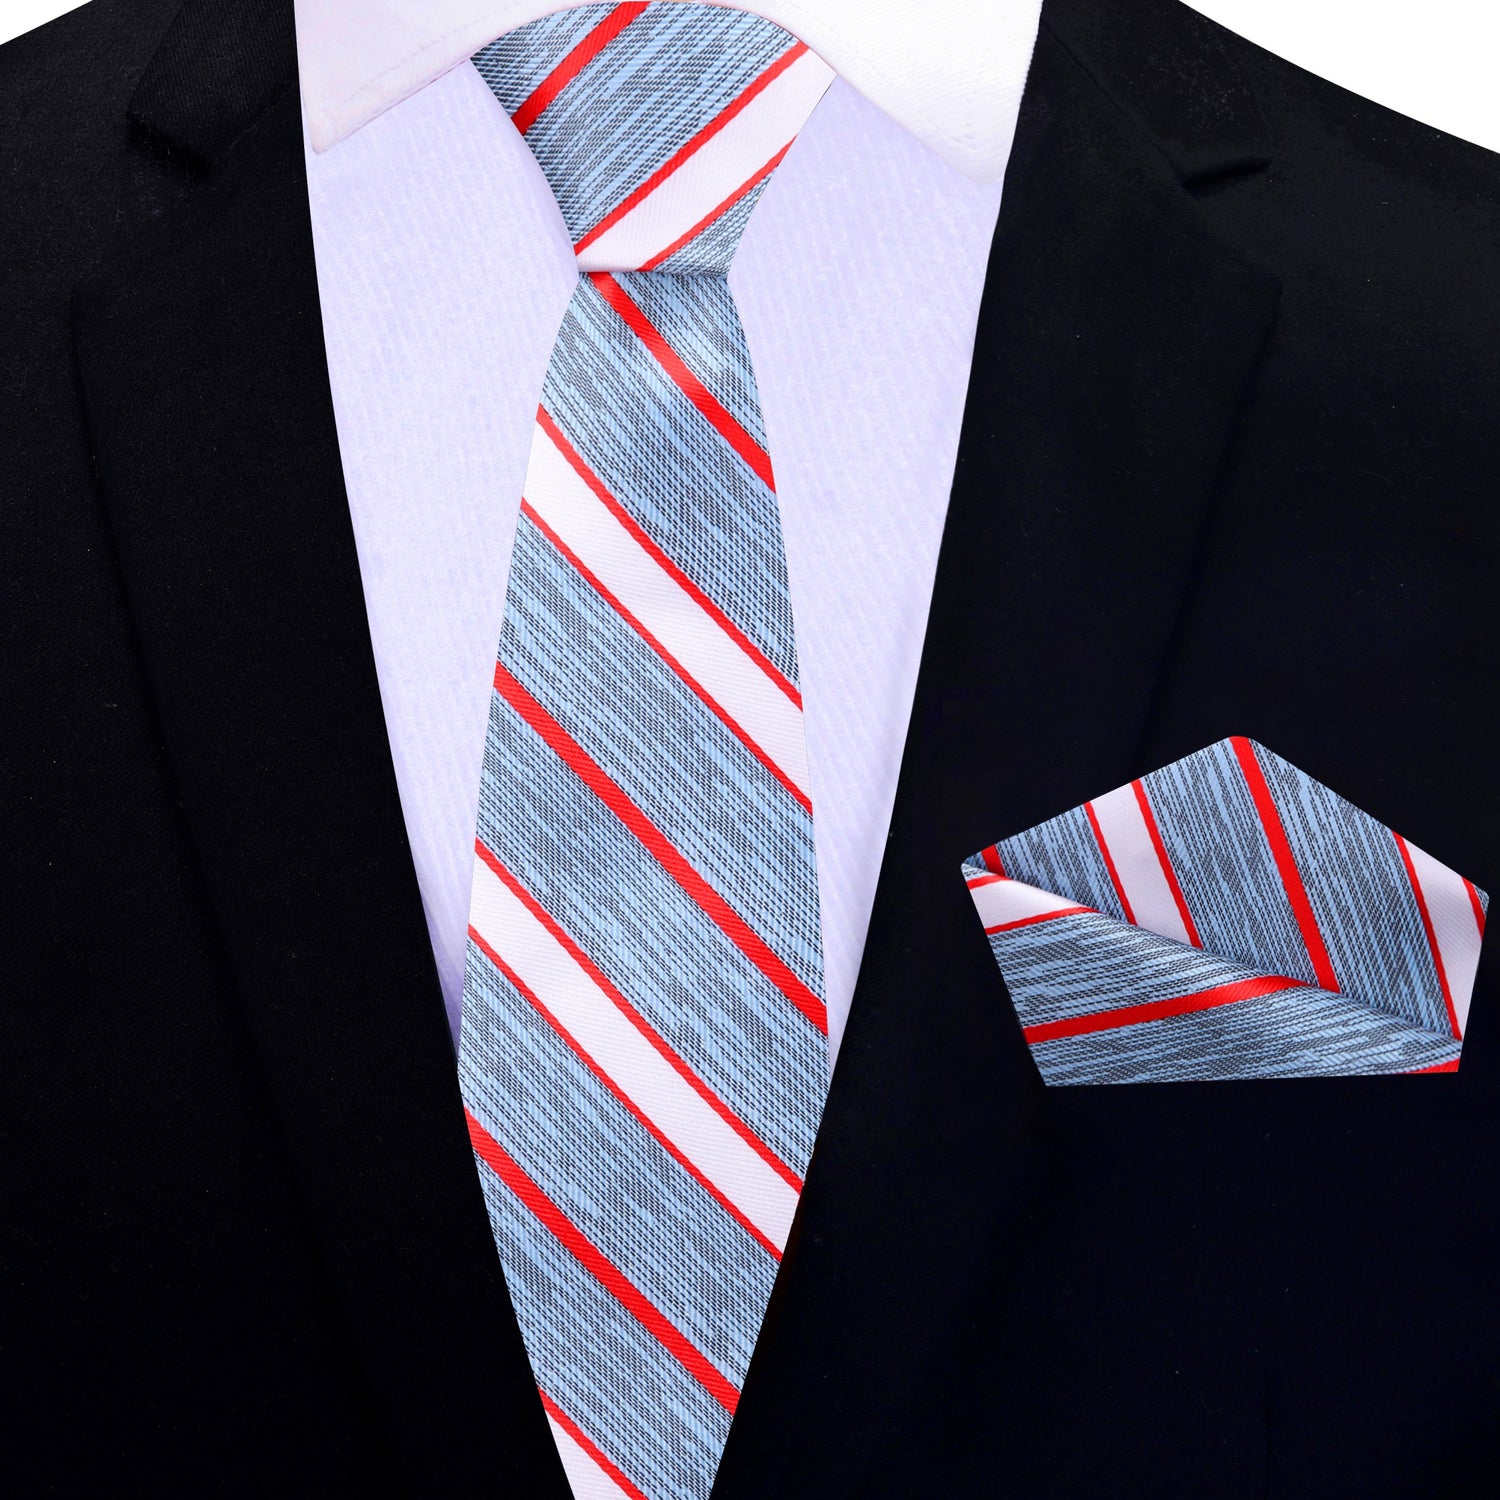 Thin Tie View: Deion PRIME TIME Sanders Blue, Red Stripe Tie and Pocket Square